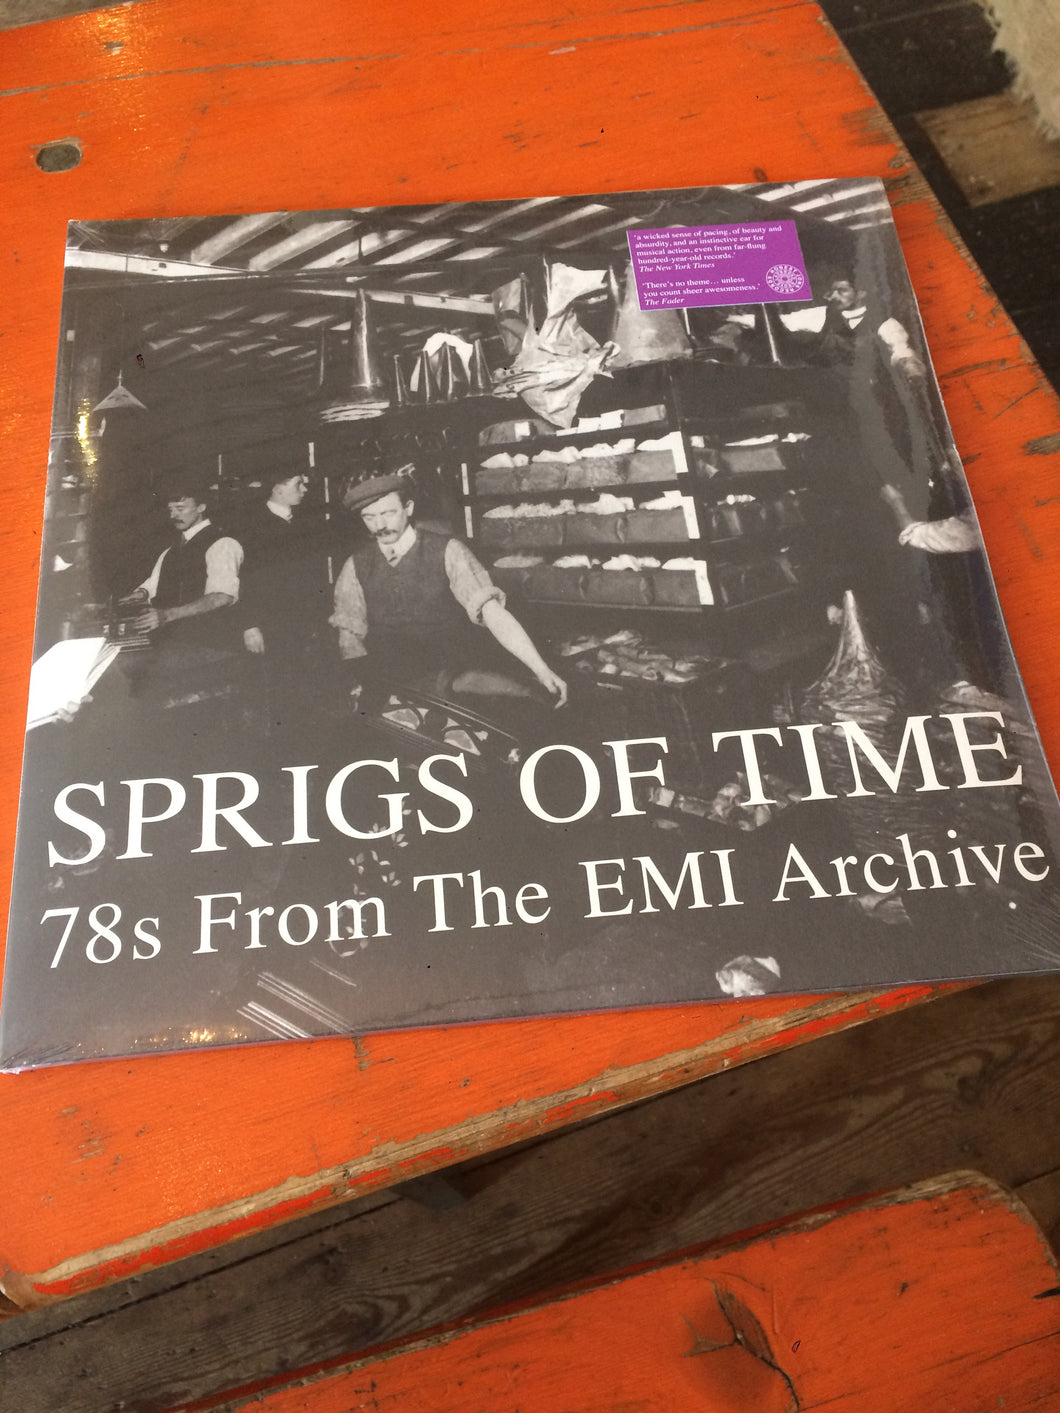 Sprigs Of Time - 78s From The EMI Archive